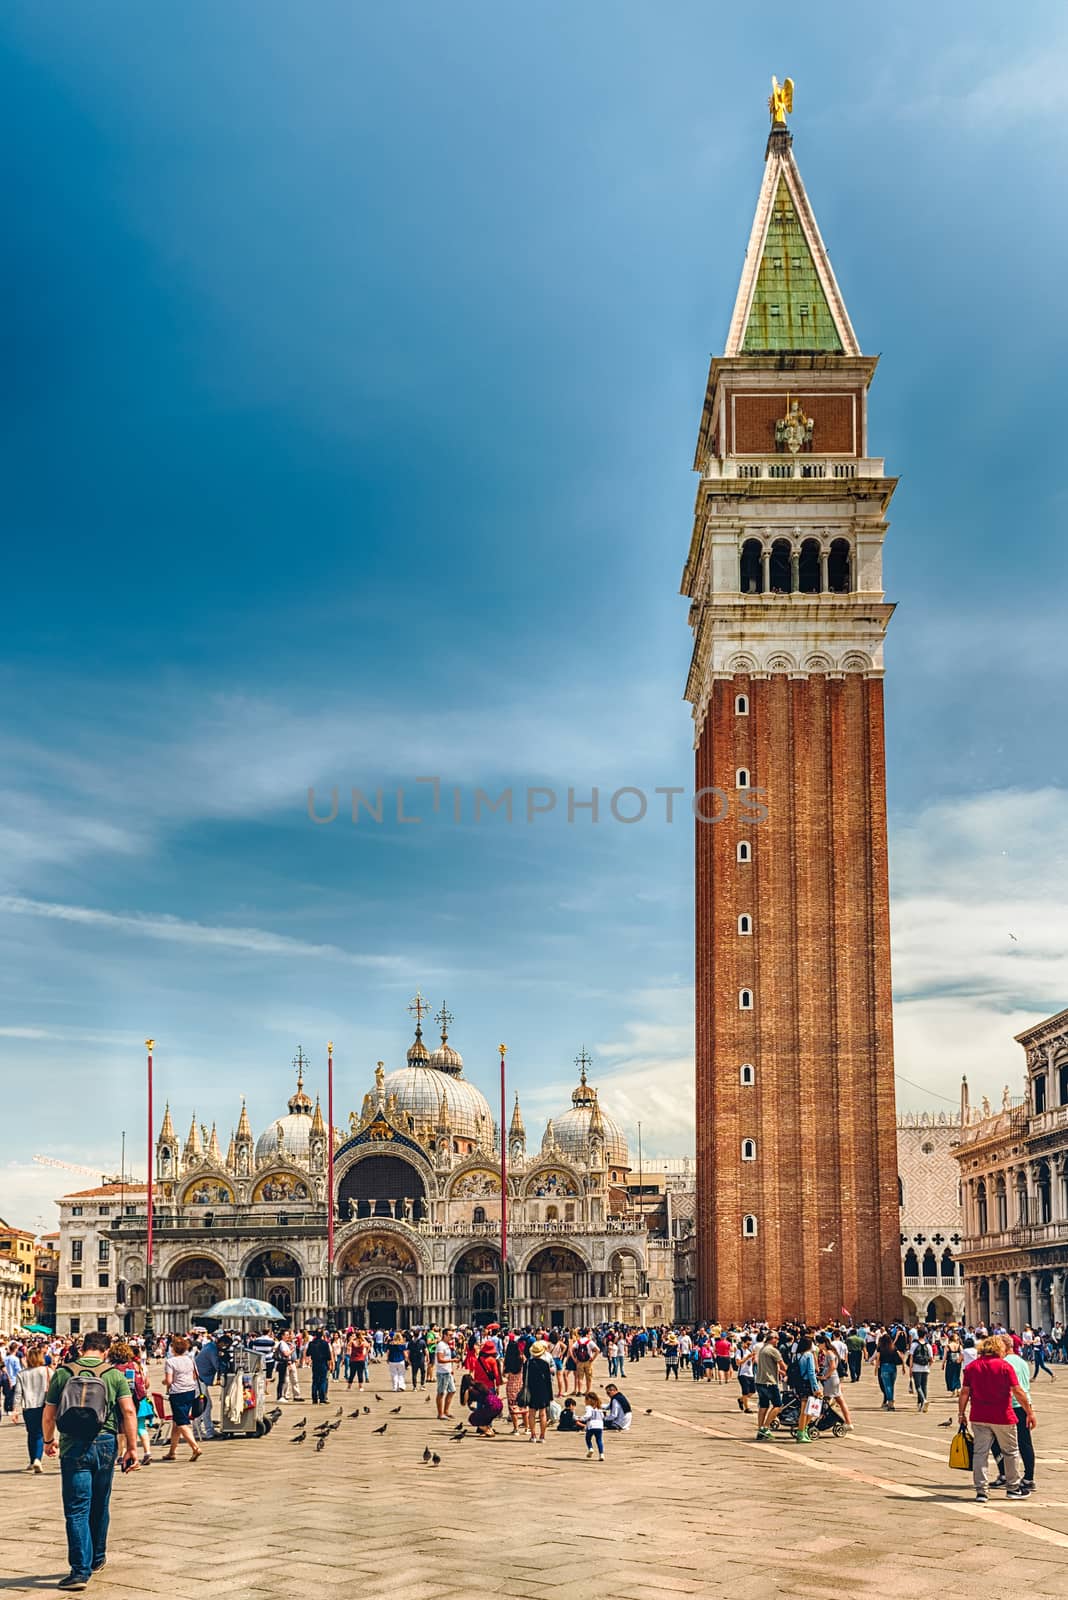 Tourists visiting the iconic St. Mark's Square in Venice, Italy by marcorubino